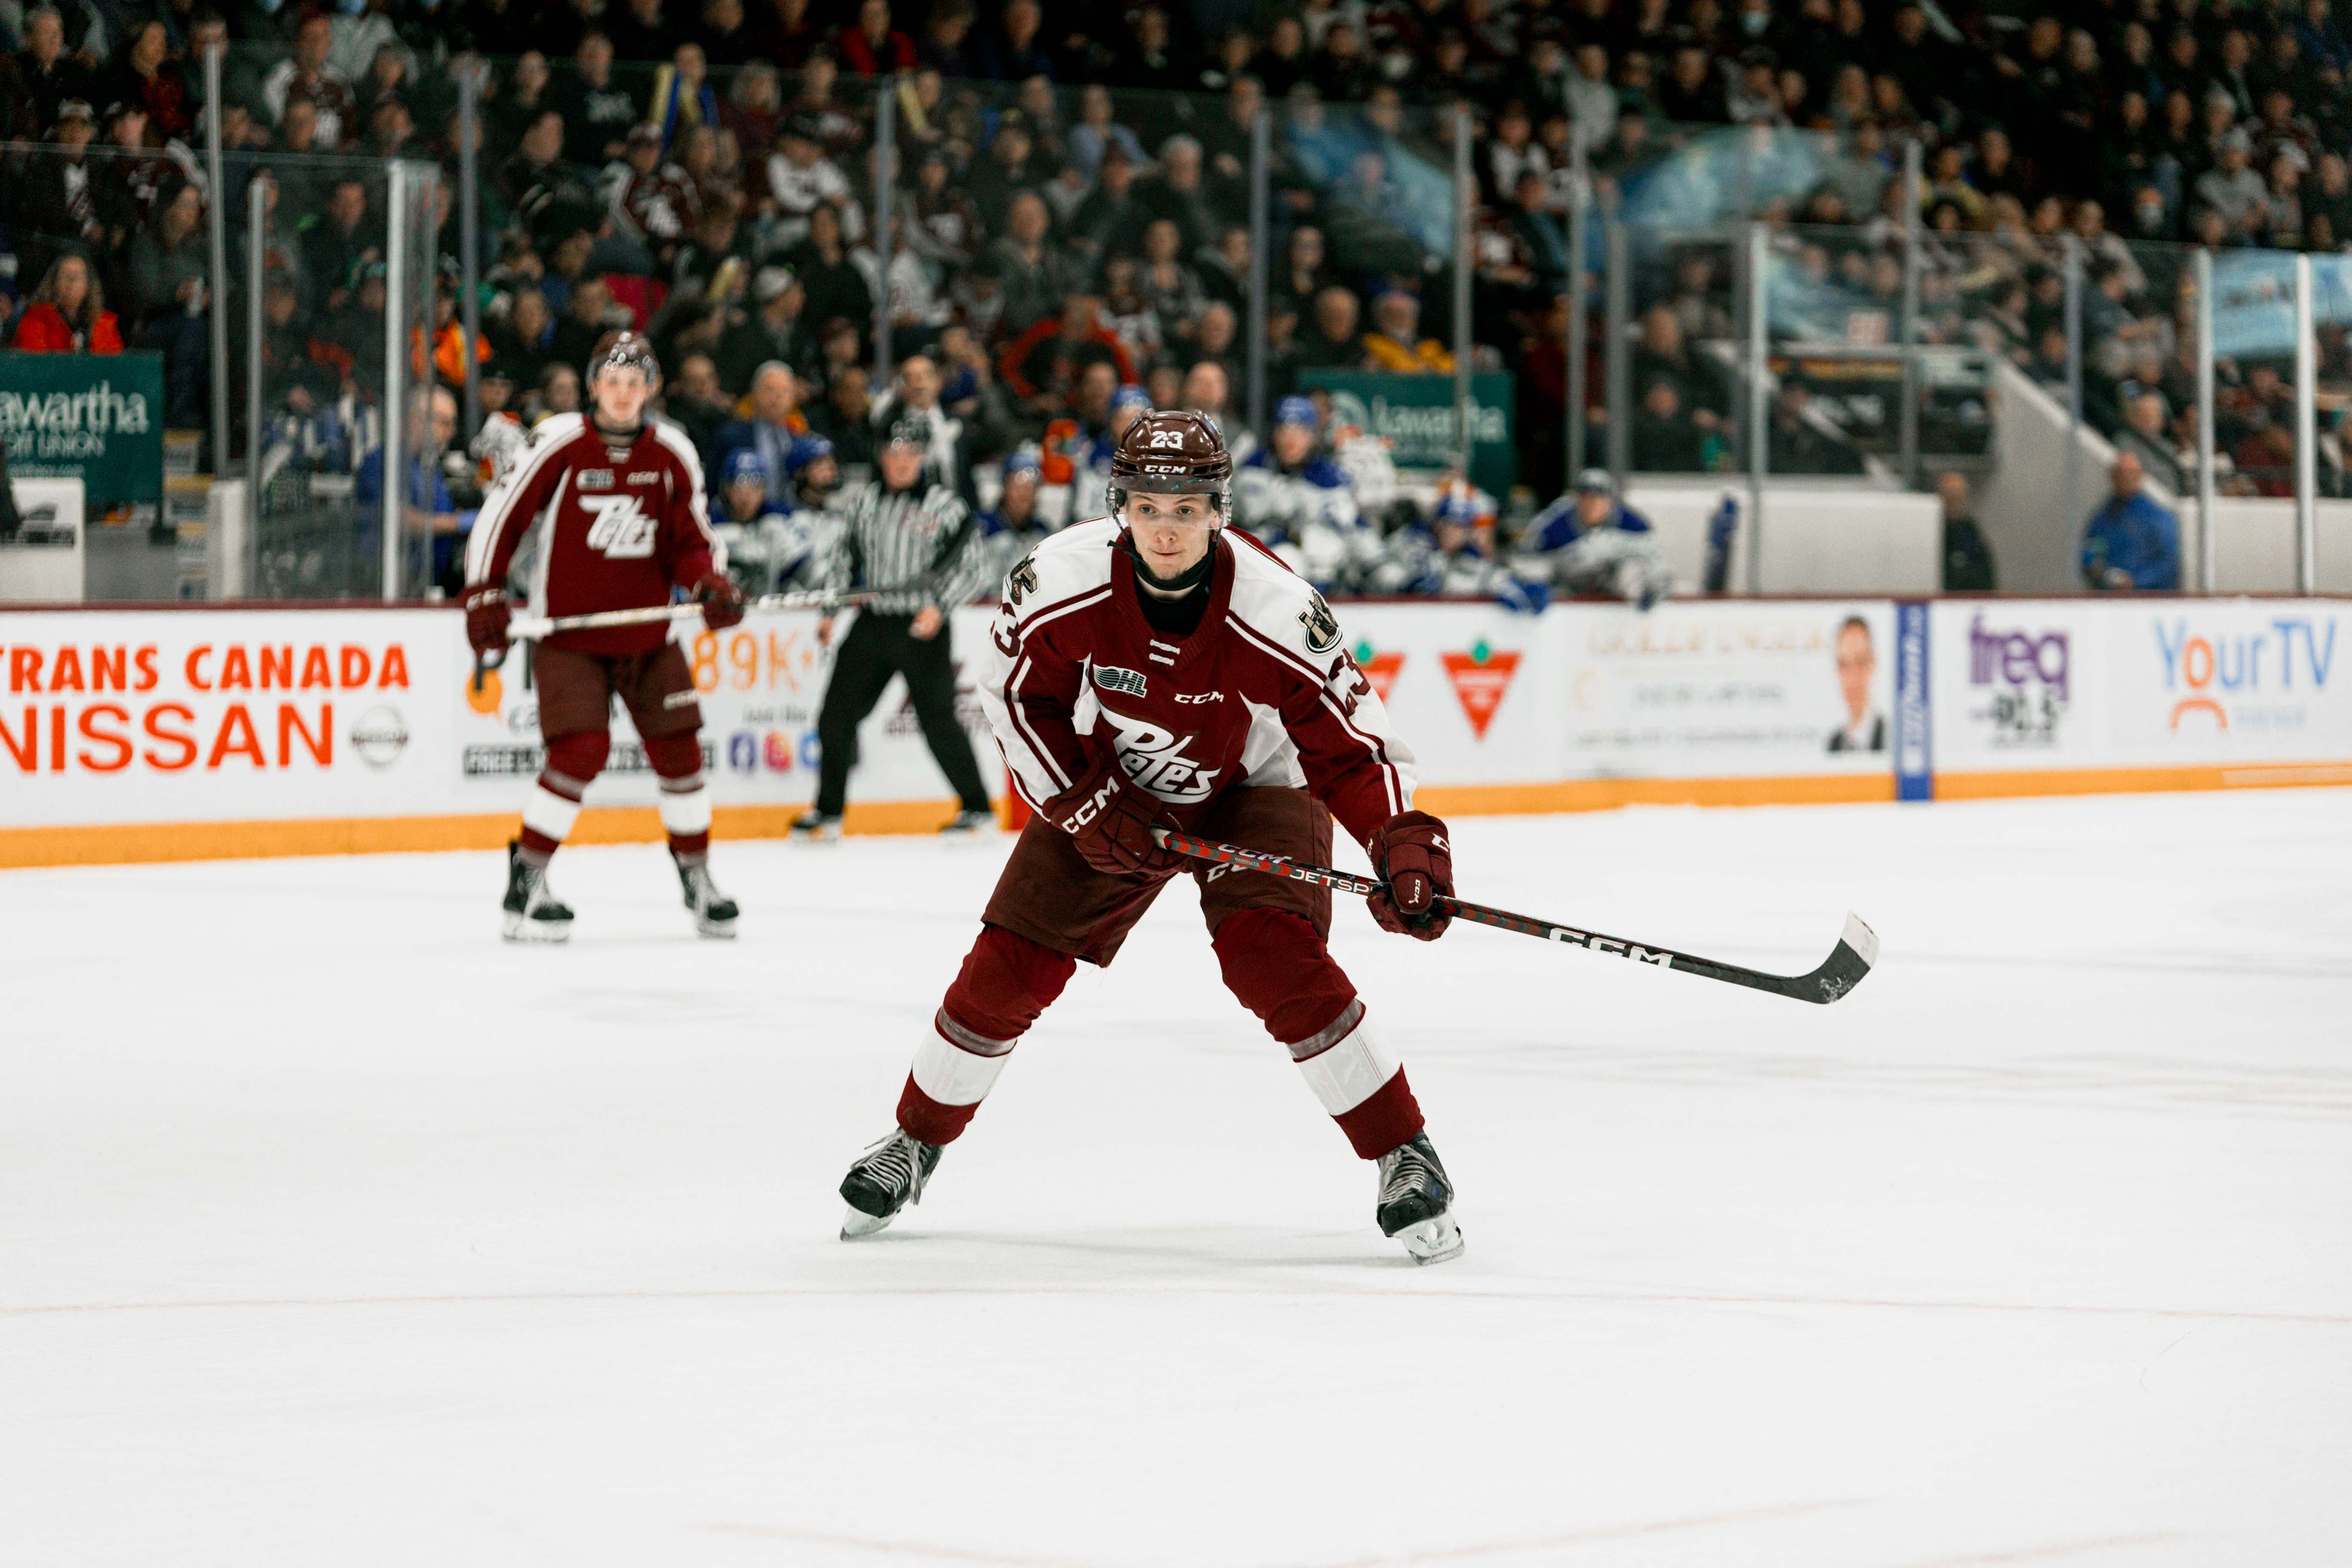 Melee Leads the Way with a Goal and Two Assists as Petes Gain First Win of the Preseason After Shootout